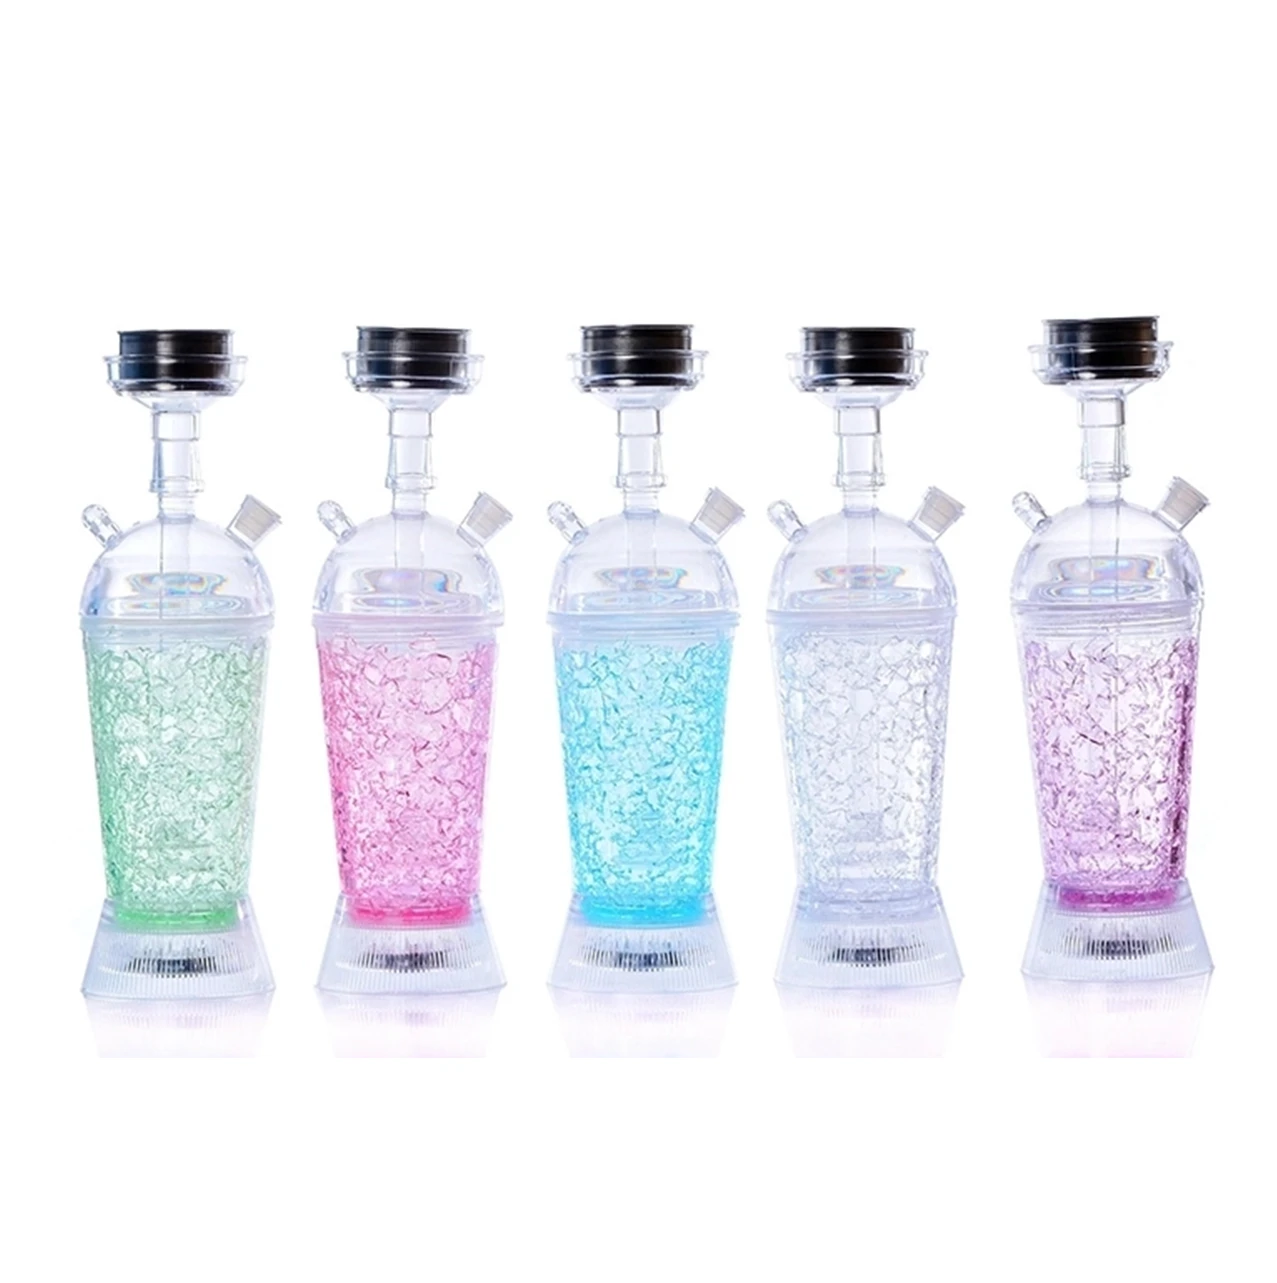 Wholesale best-selling acrylic portable shisha hookah medium cups with LED for leisure and entertainment1